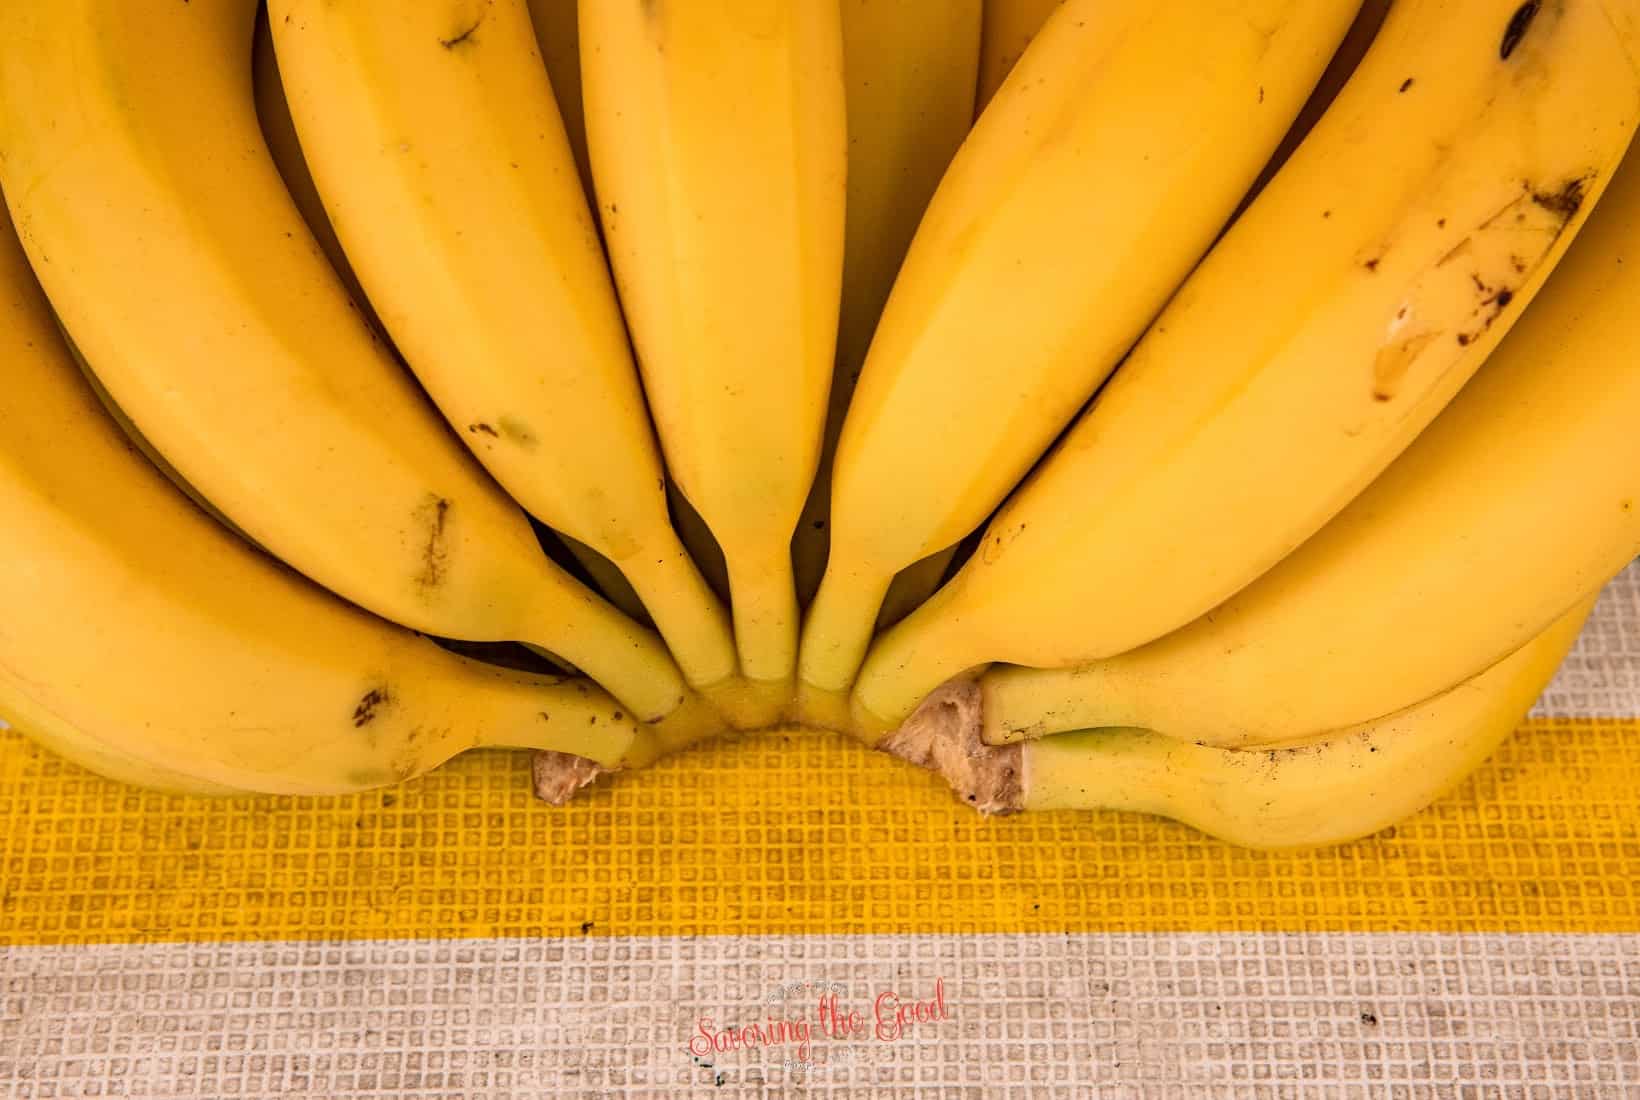 A bunch of xiangjiao bananas on a yellow and white striped cloth.